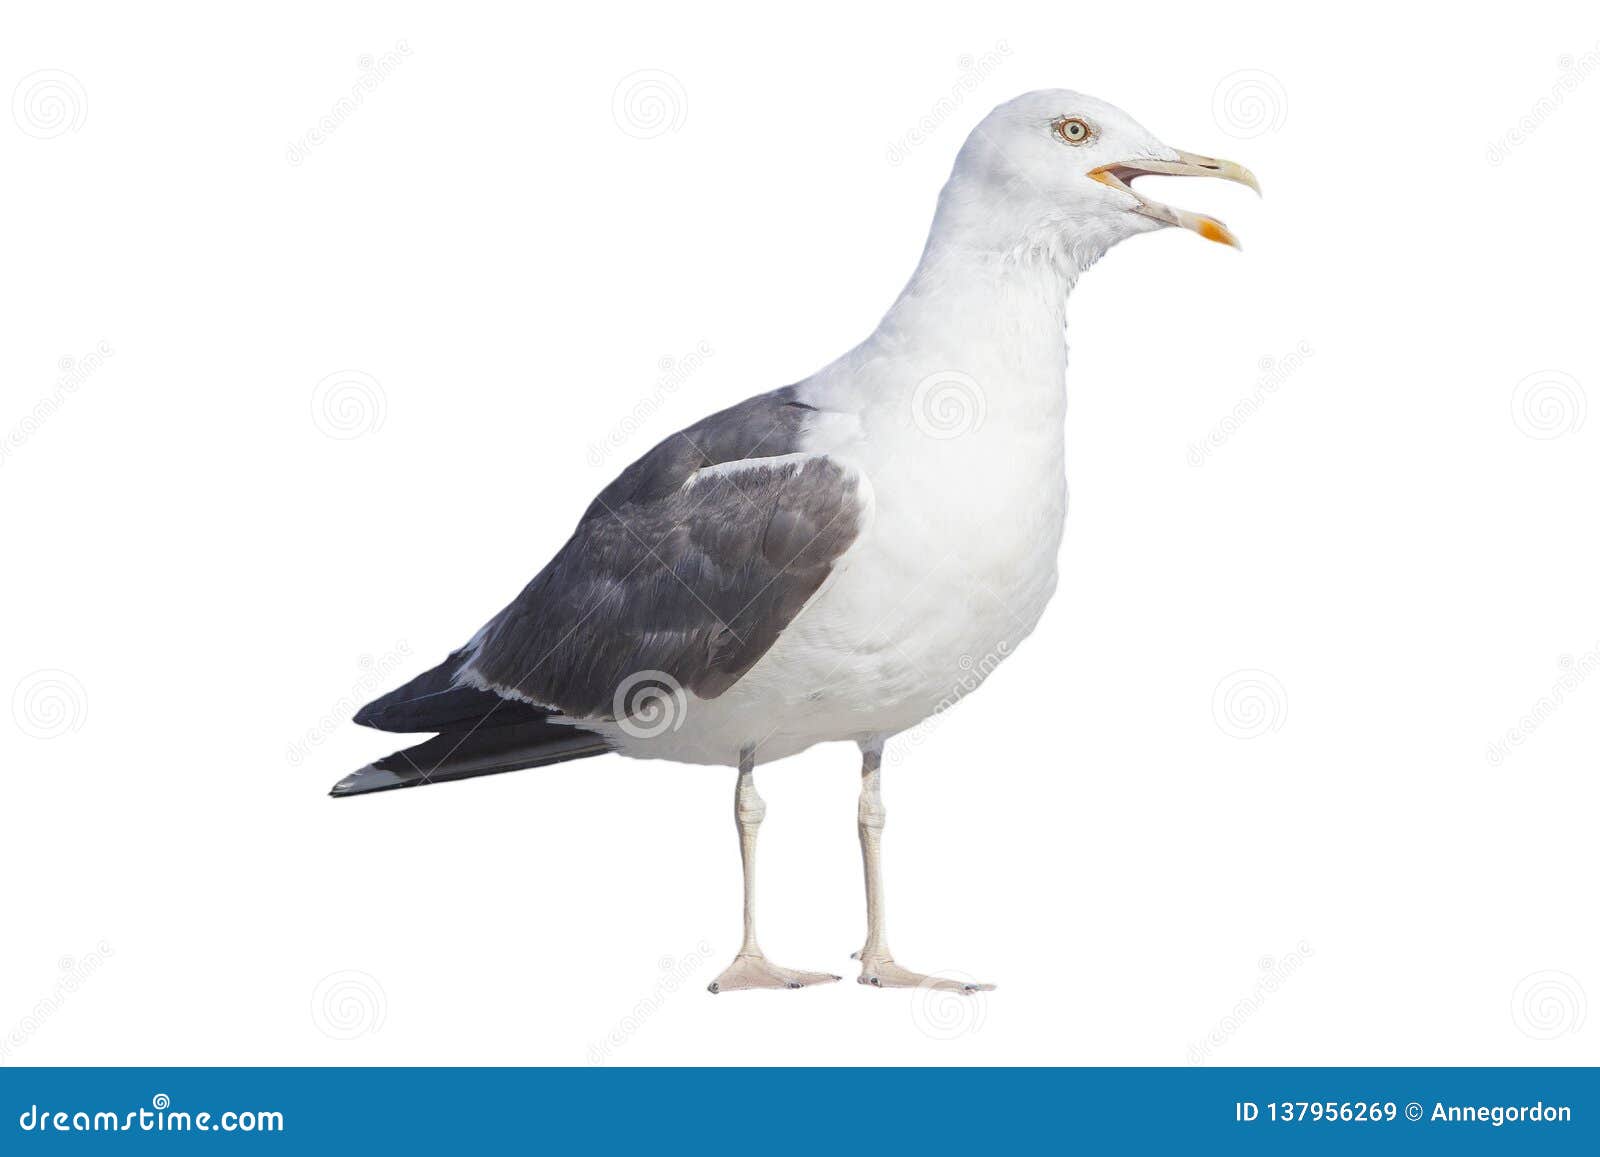 profile of angry seagull on white background